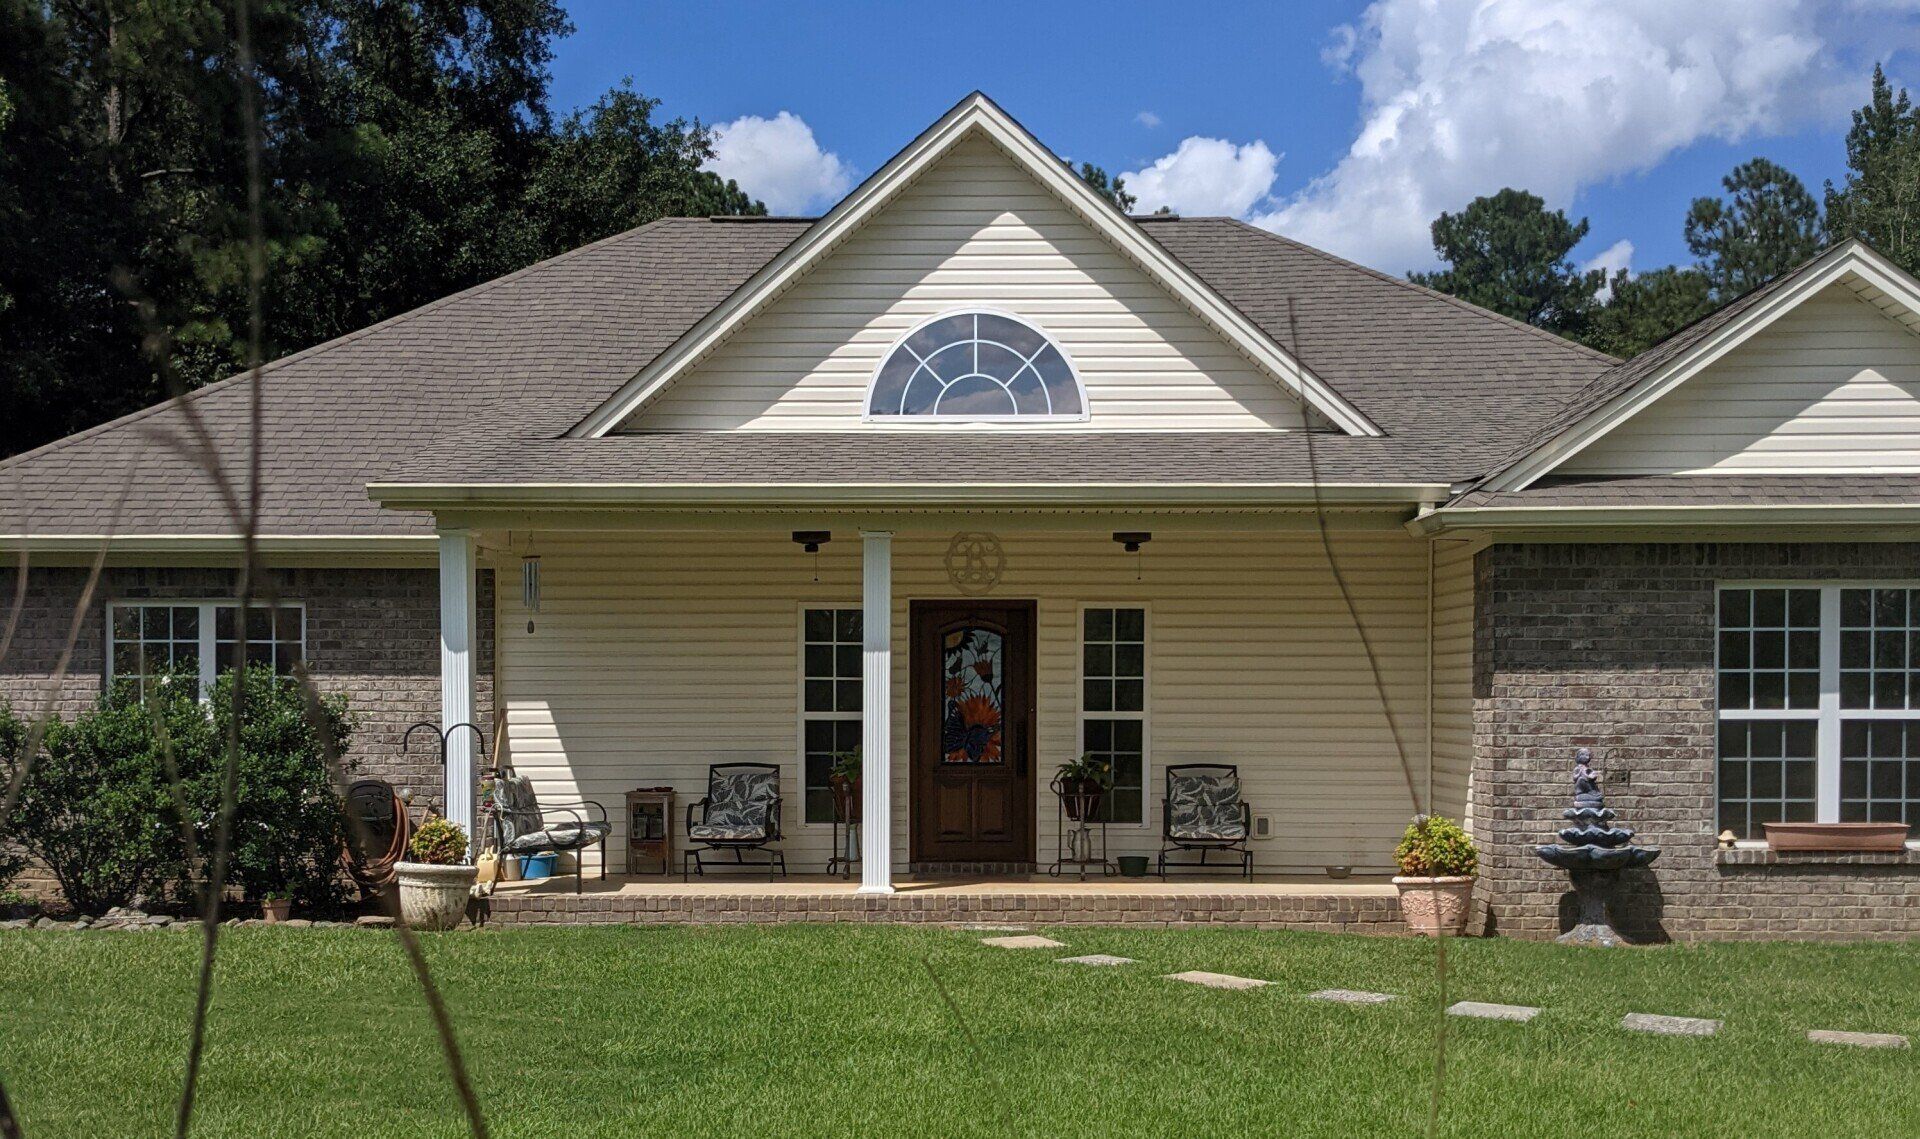 Residential home tint - Maximum Heat Gain was blocked leaving an even temperature inside this home in Wetumpka, AL